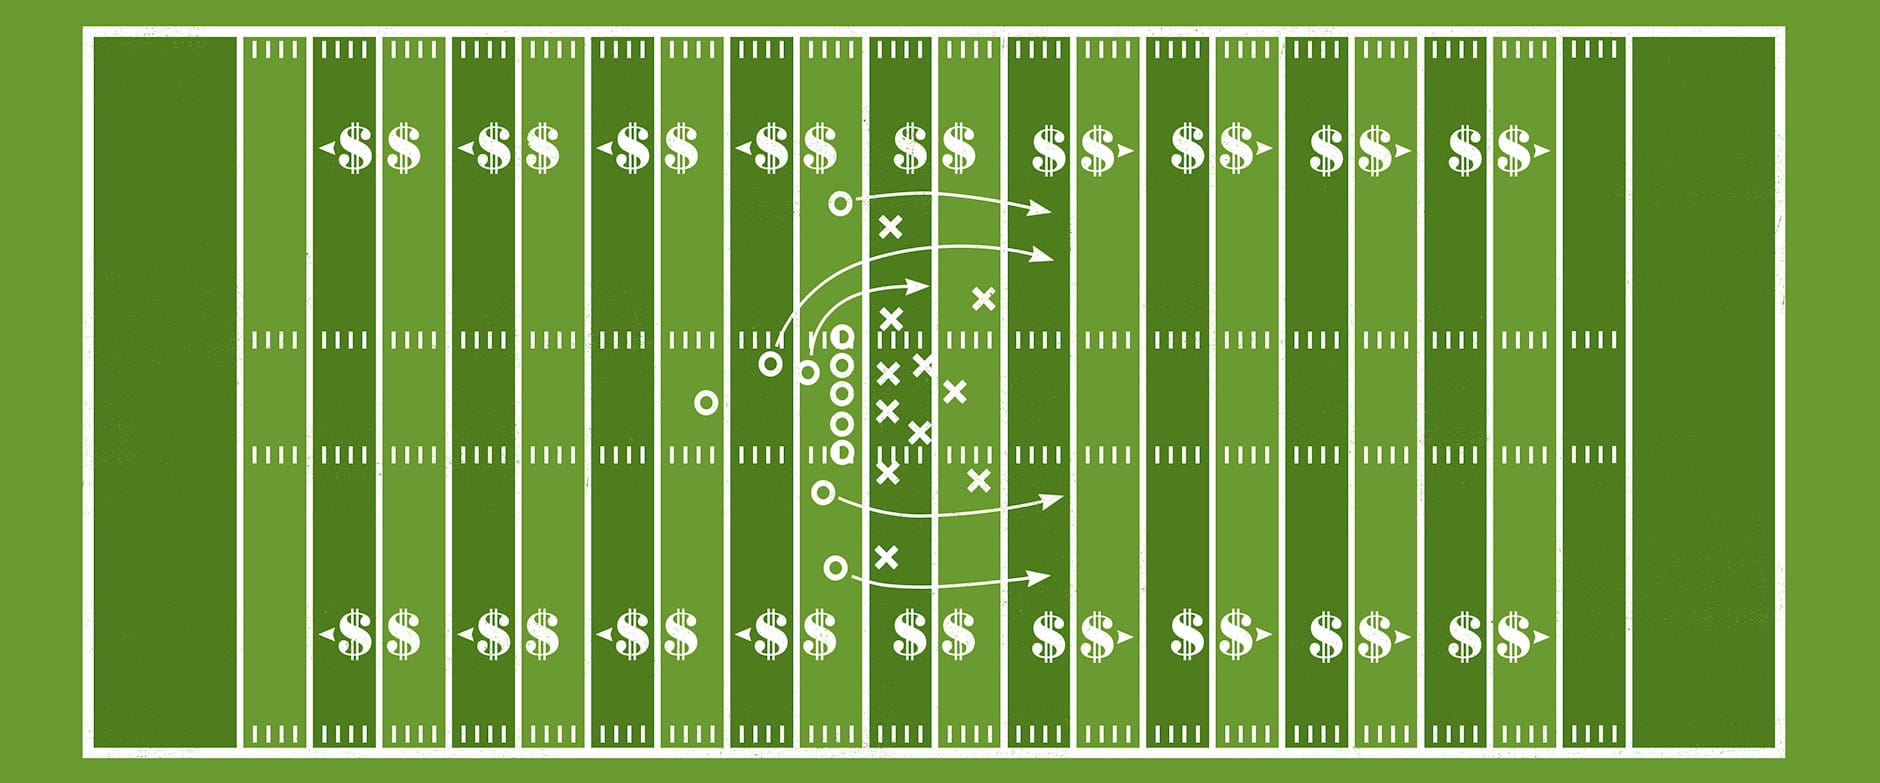 Football field with dollar signs instead of numbers at the yard lines